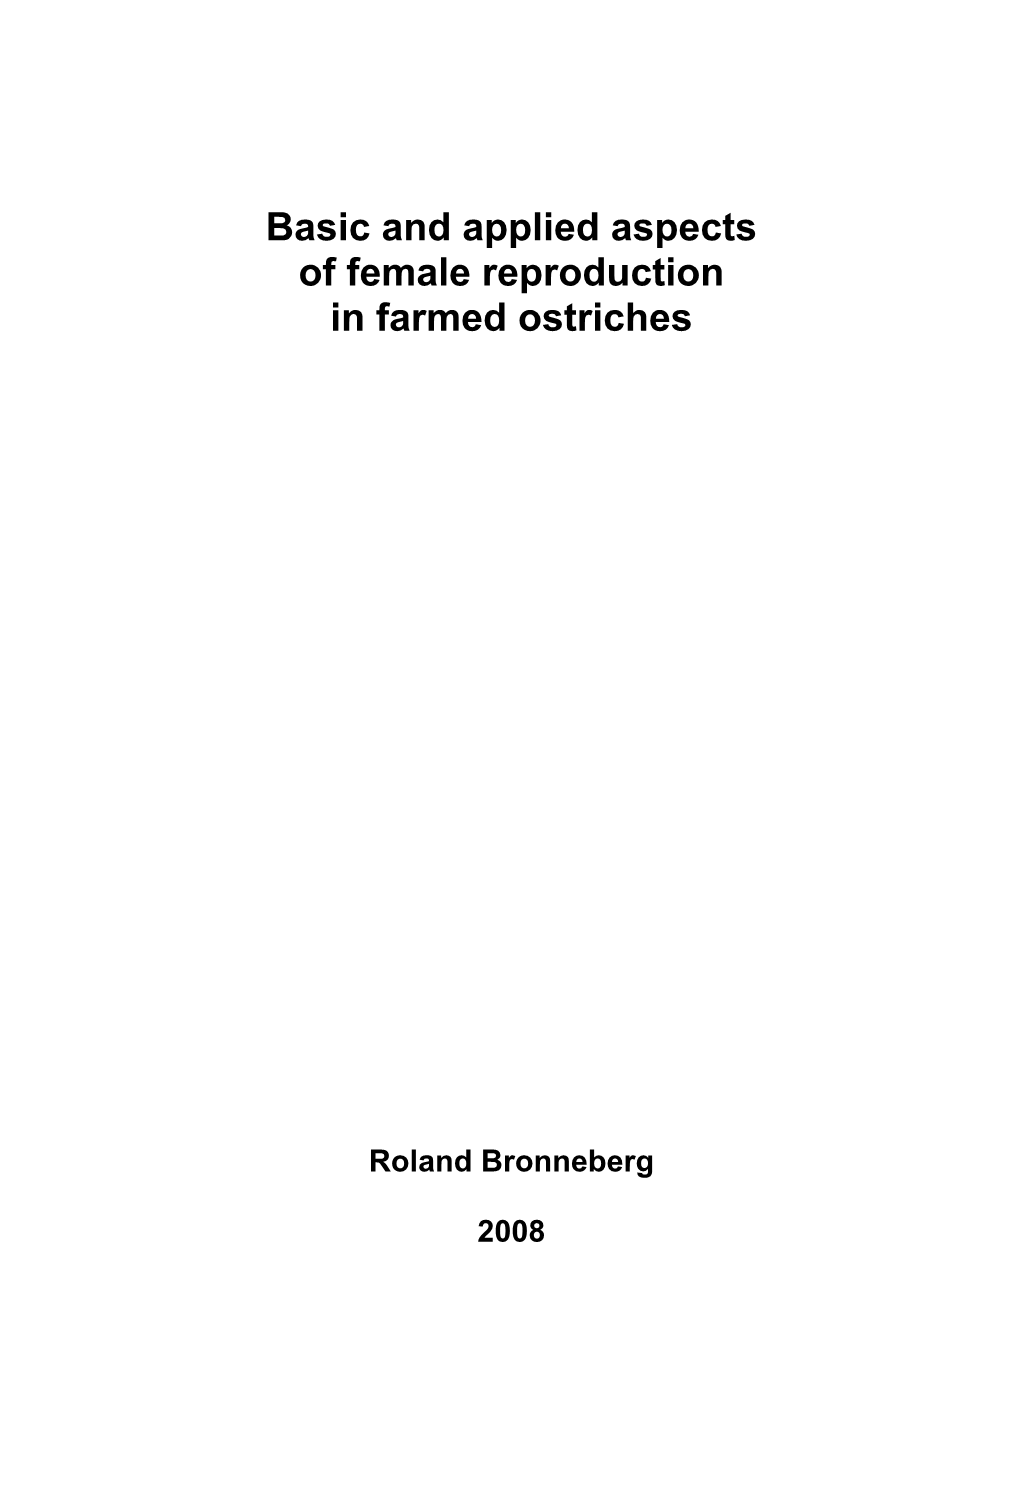 Basic and Applied Aspects of Female Reproduction in Farmed Ostriches